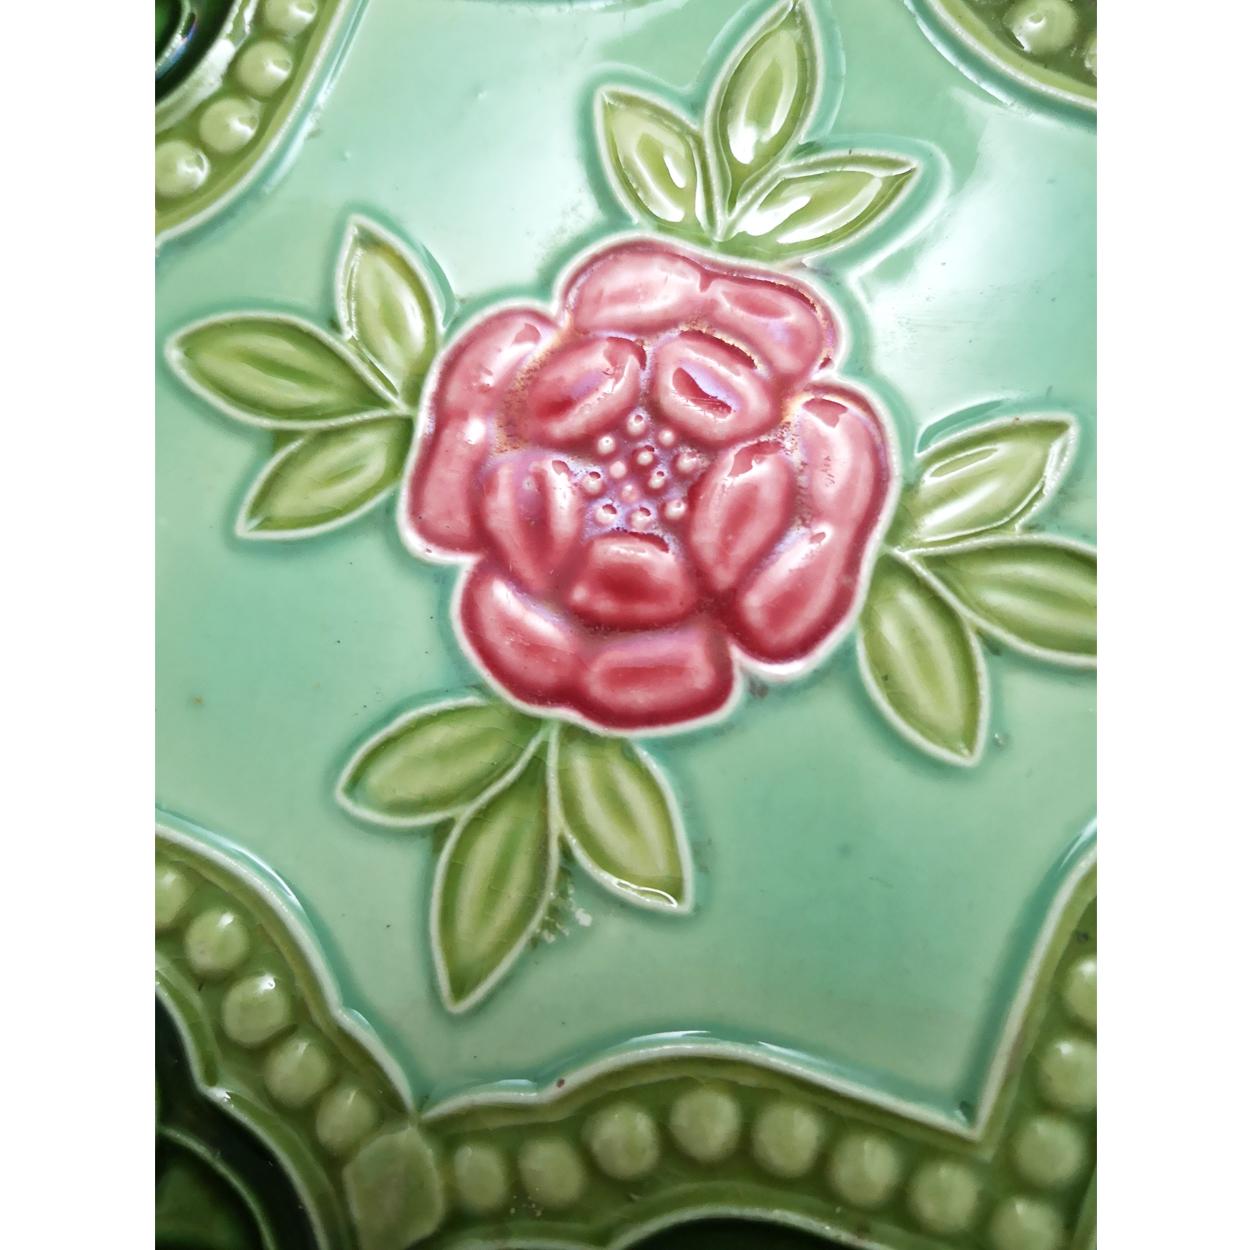 This is an amazing set of mixed authentic antique Jugendstil handmade tiles By S.A. Produits Ceramiques de la Dyle,1930.
 A beautiful relief and deep rich warm green, turquoise, and rose color. These tiles would be charming displayed on easels,